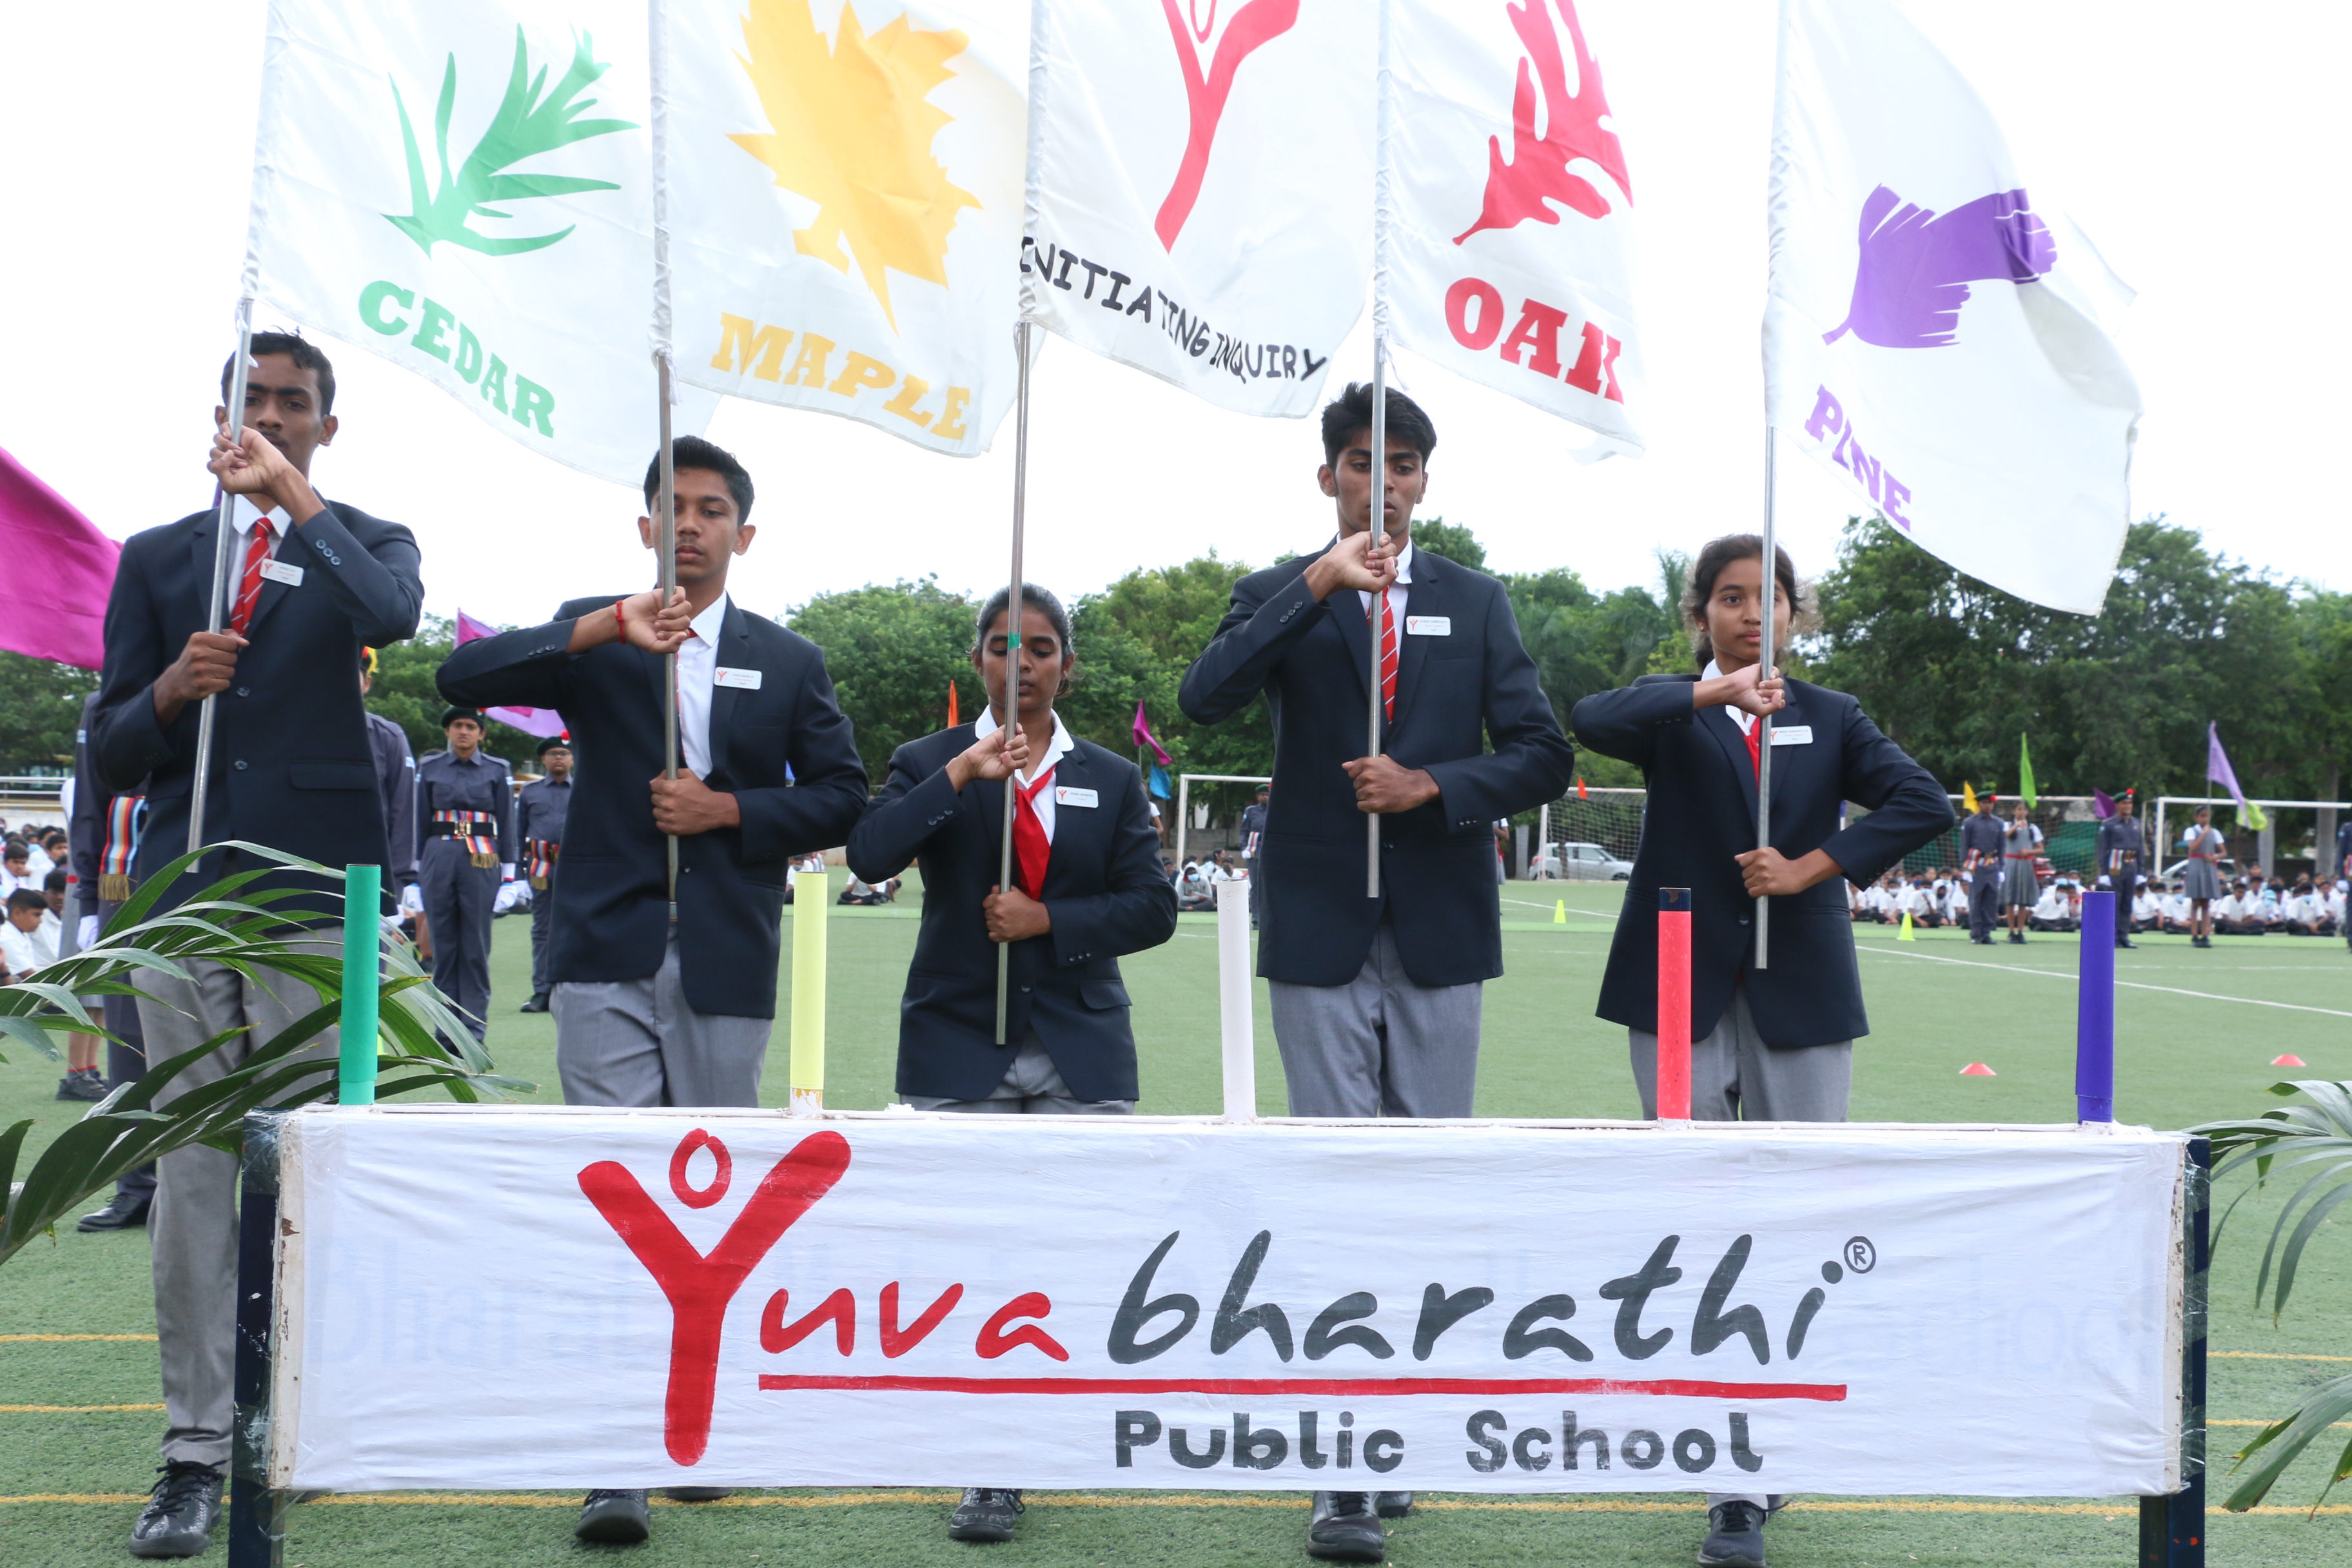 Yuvabharathi Public School - Prefect and Captains with their flags - Investiture Ceremony 2022 | YBPS - Best CBSE School in Coimbatore 